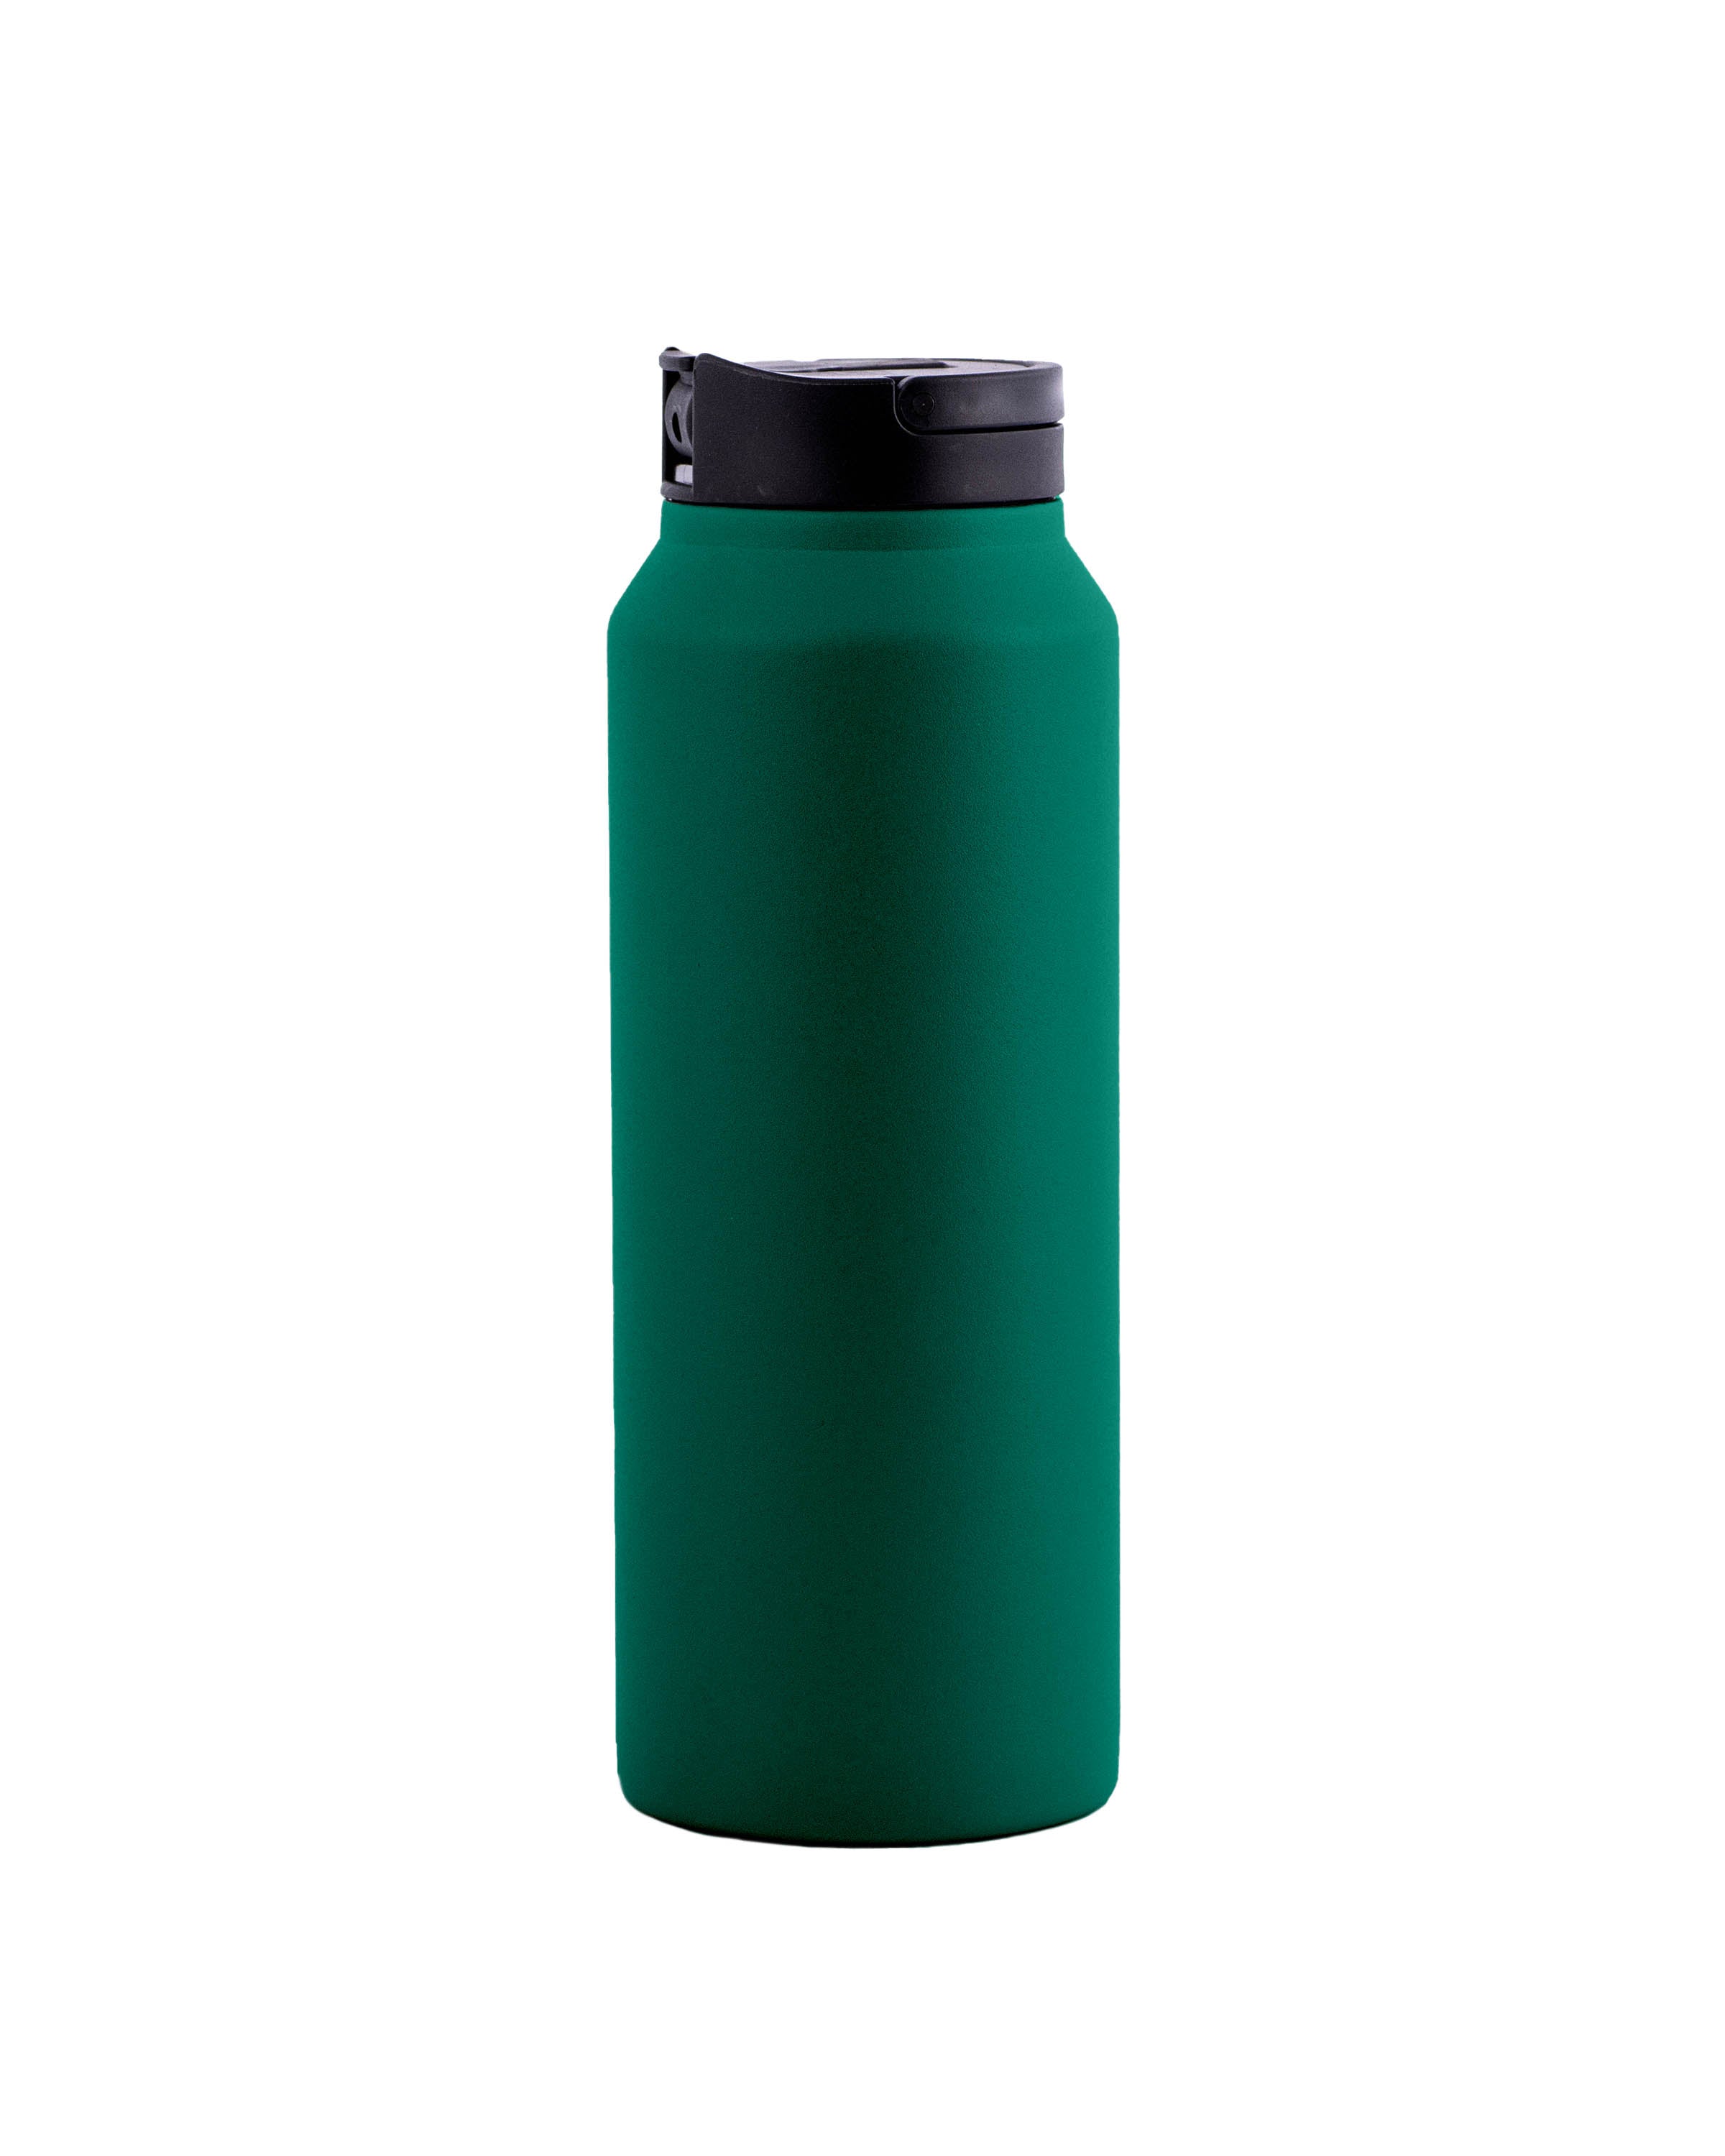 The Outdoor Water Bottle - Evergreen